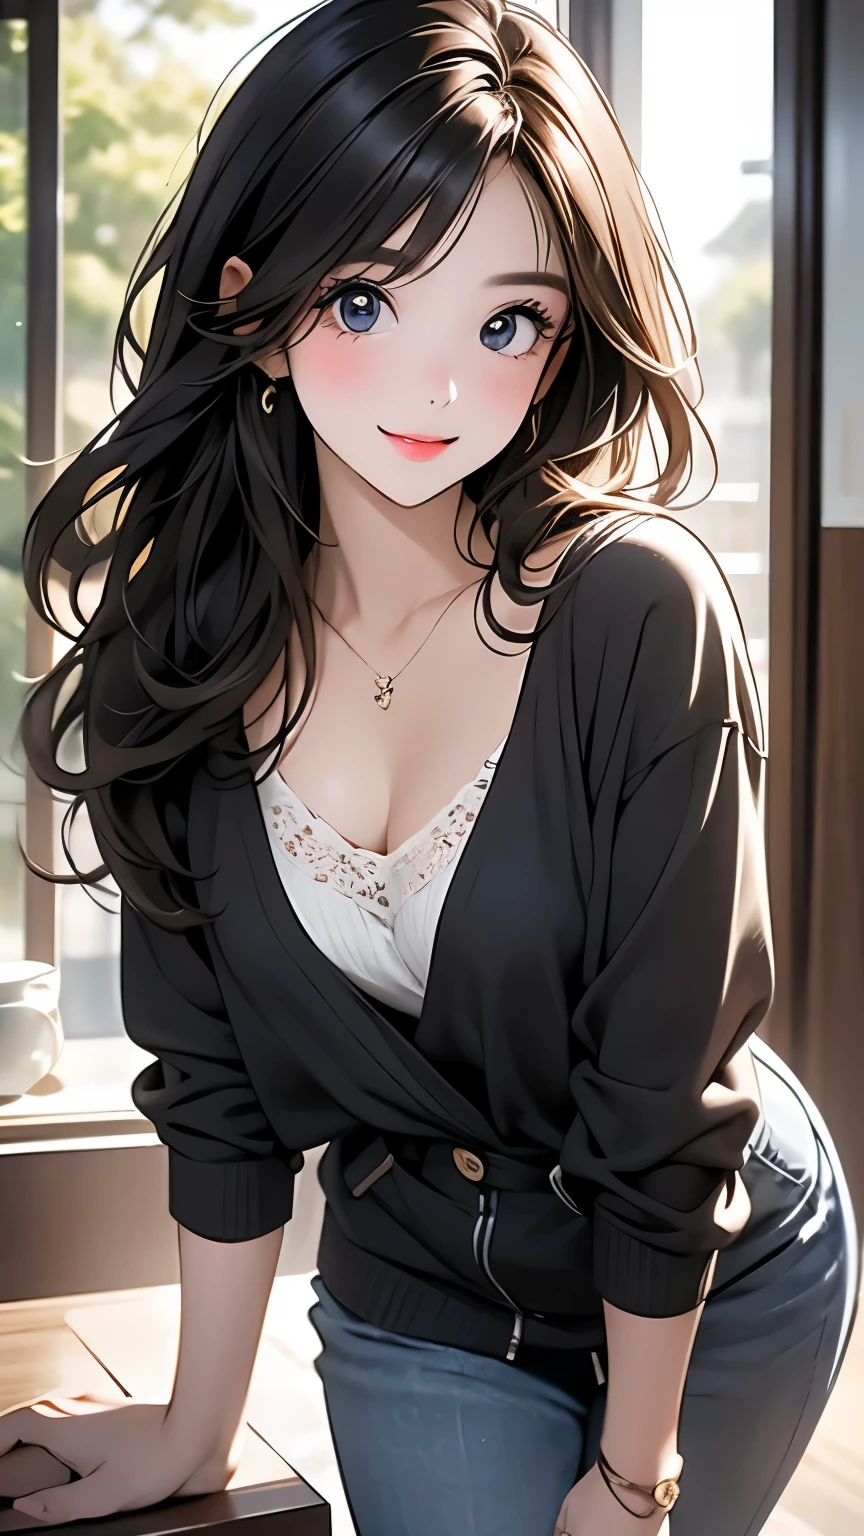 pieces fly、highest quality、figure、Super detailed、small details、High resolution、8K Dende Wallpaper、Perfect dynamic composition、detailed and beautiful eyes、winter casual wear、medium hair、small breasts、Natural color lip、bold sexy pose、shy smile、harajuku style、20 year old girl、cute type、sexy shot looking at camera、